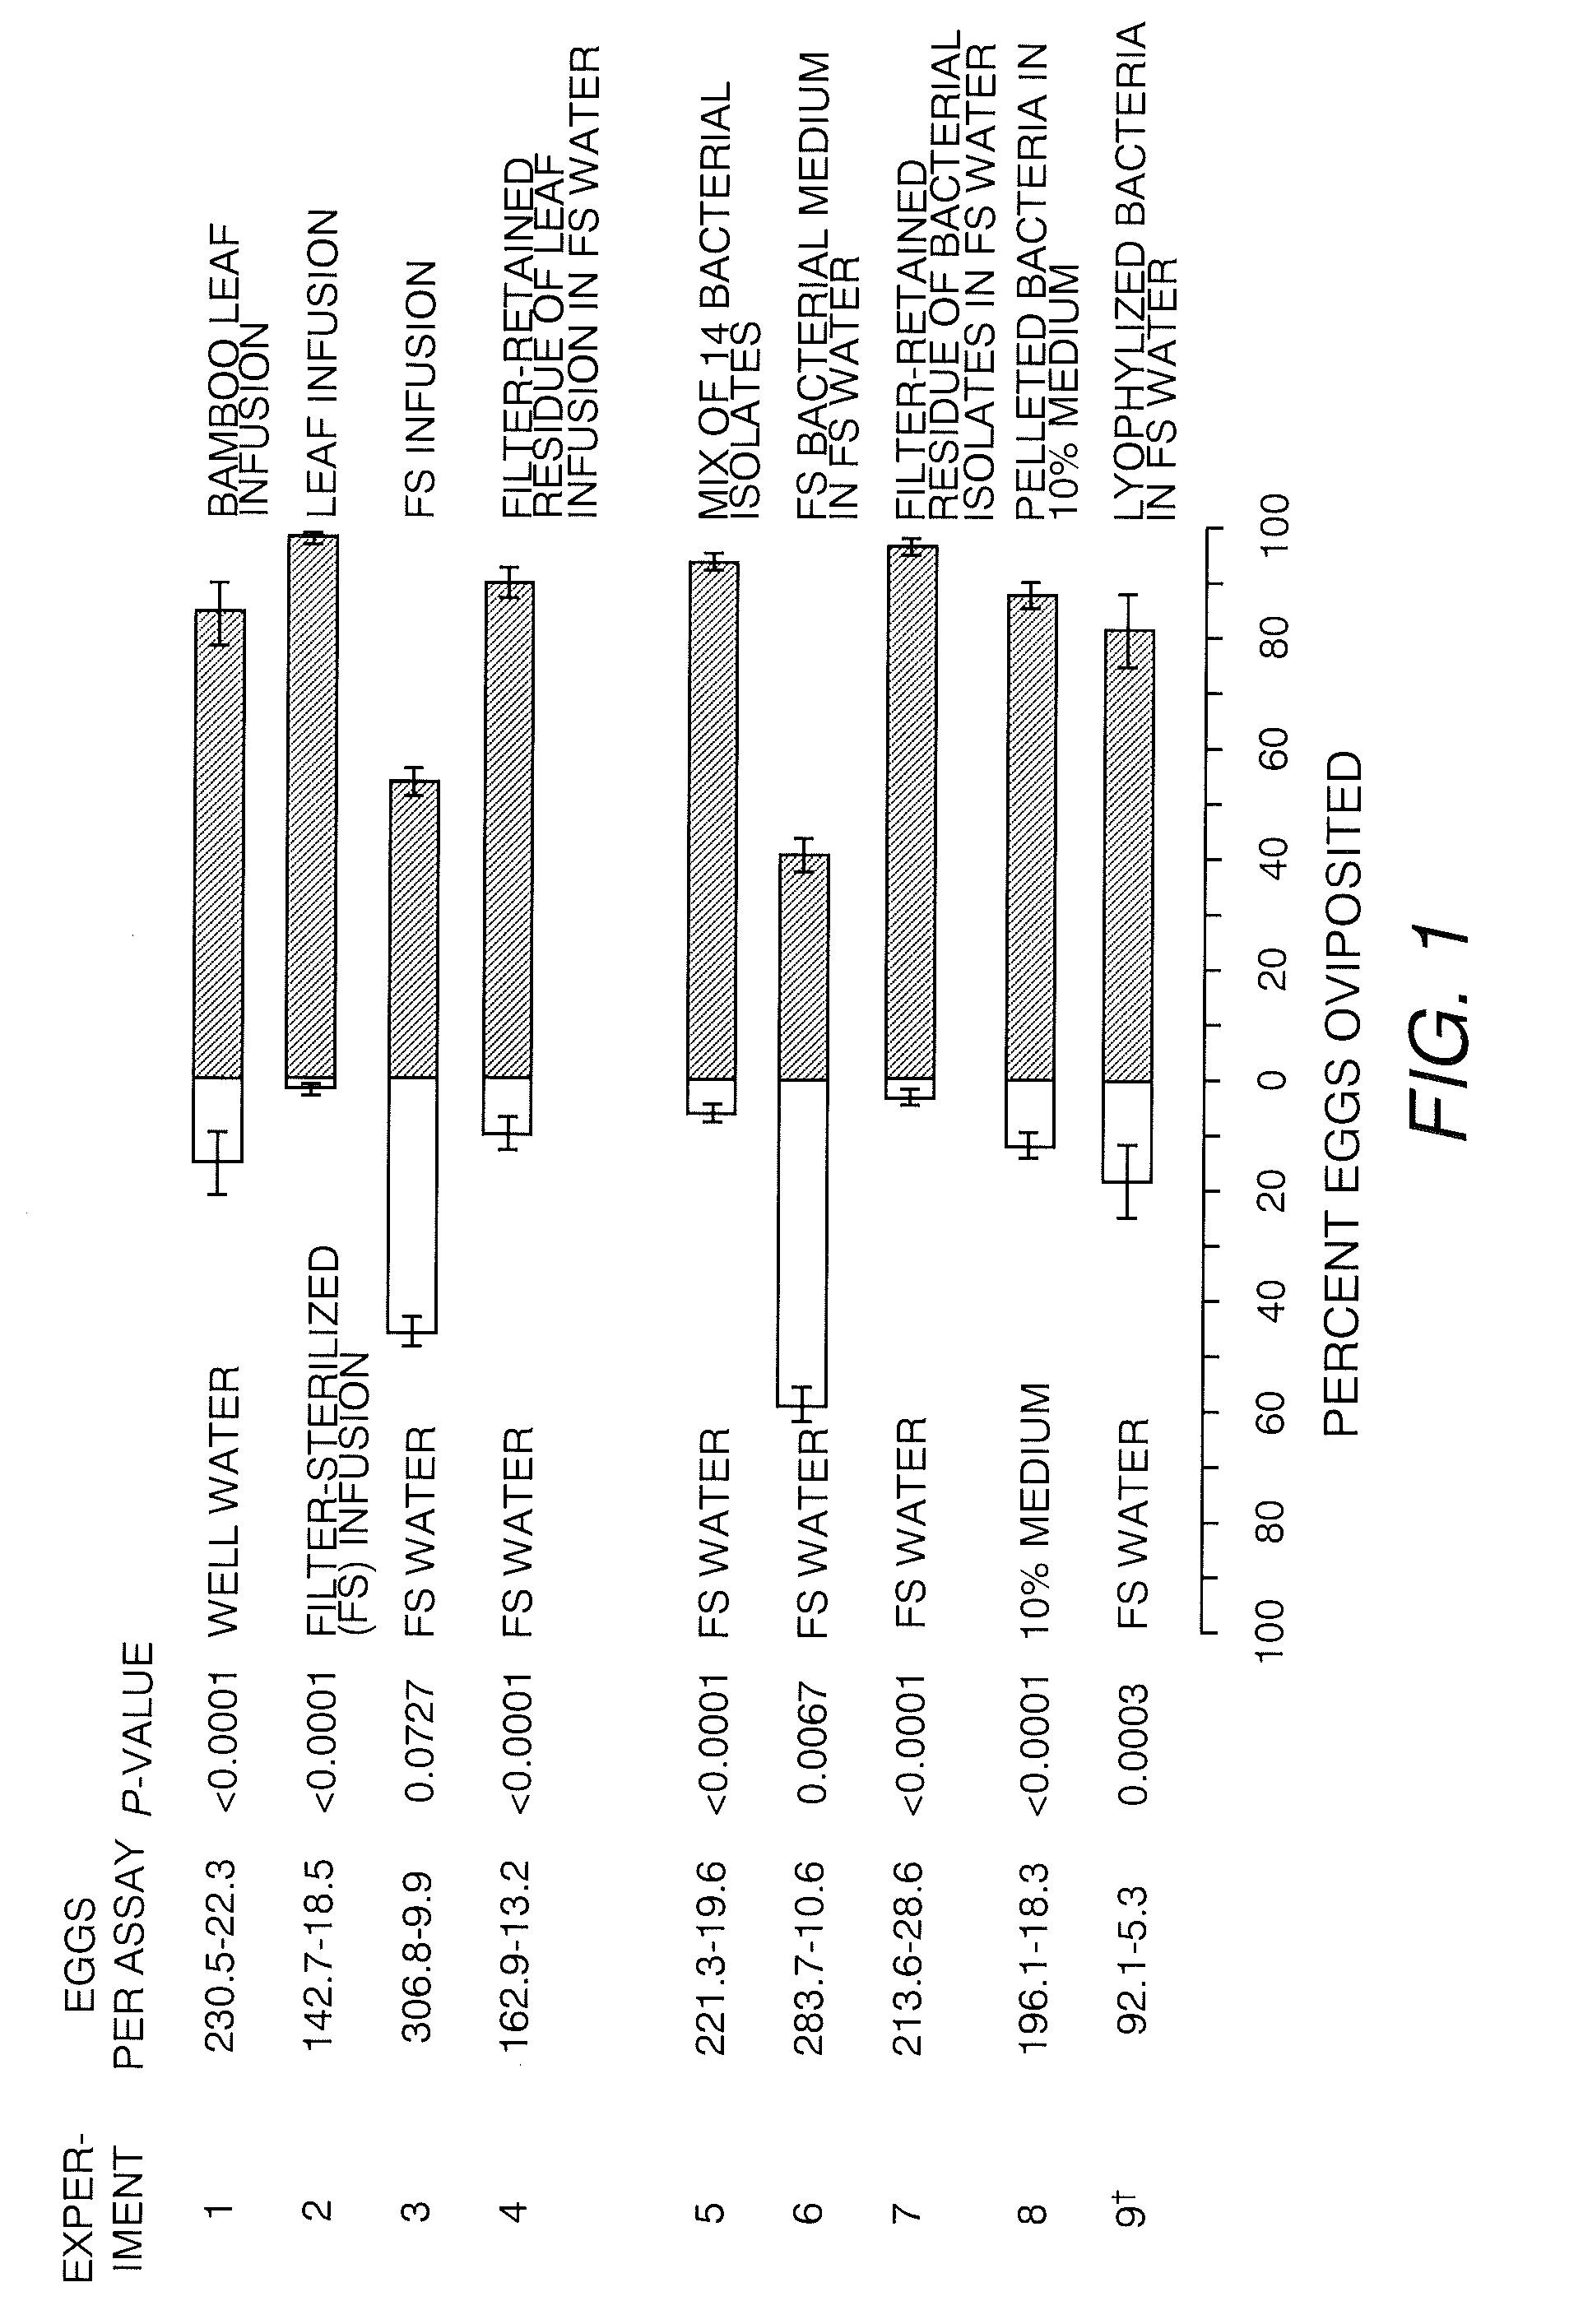 Mosquito attractant compositions and methods